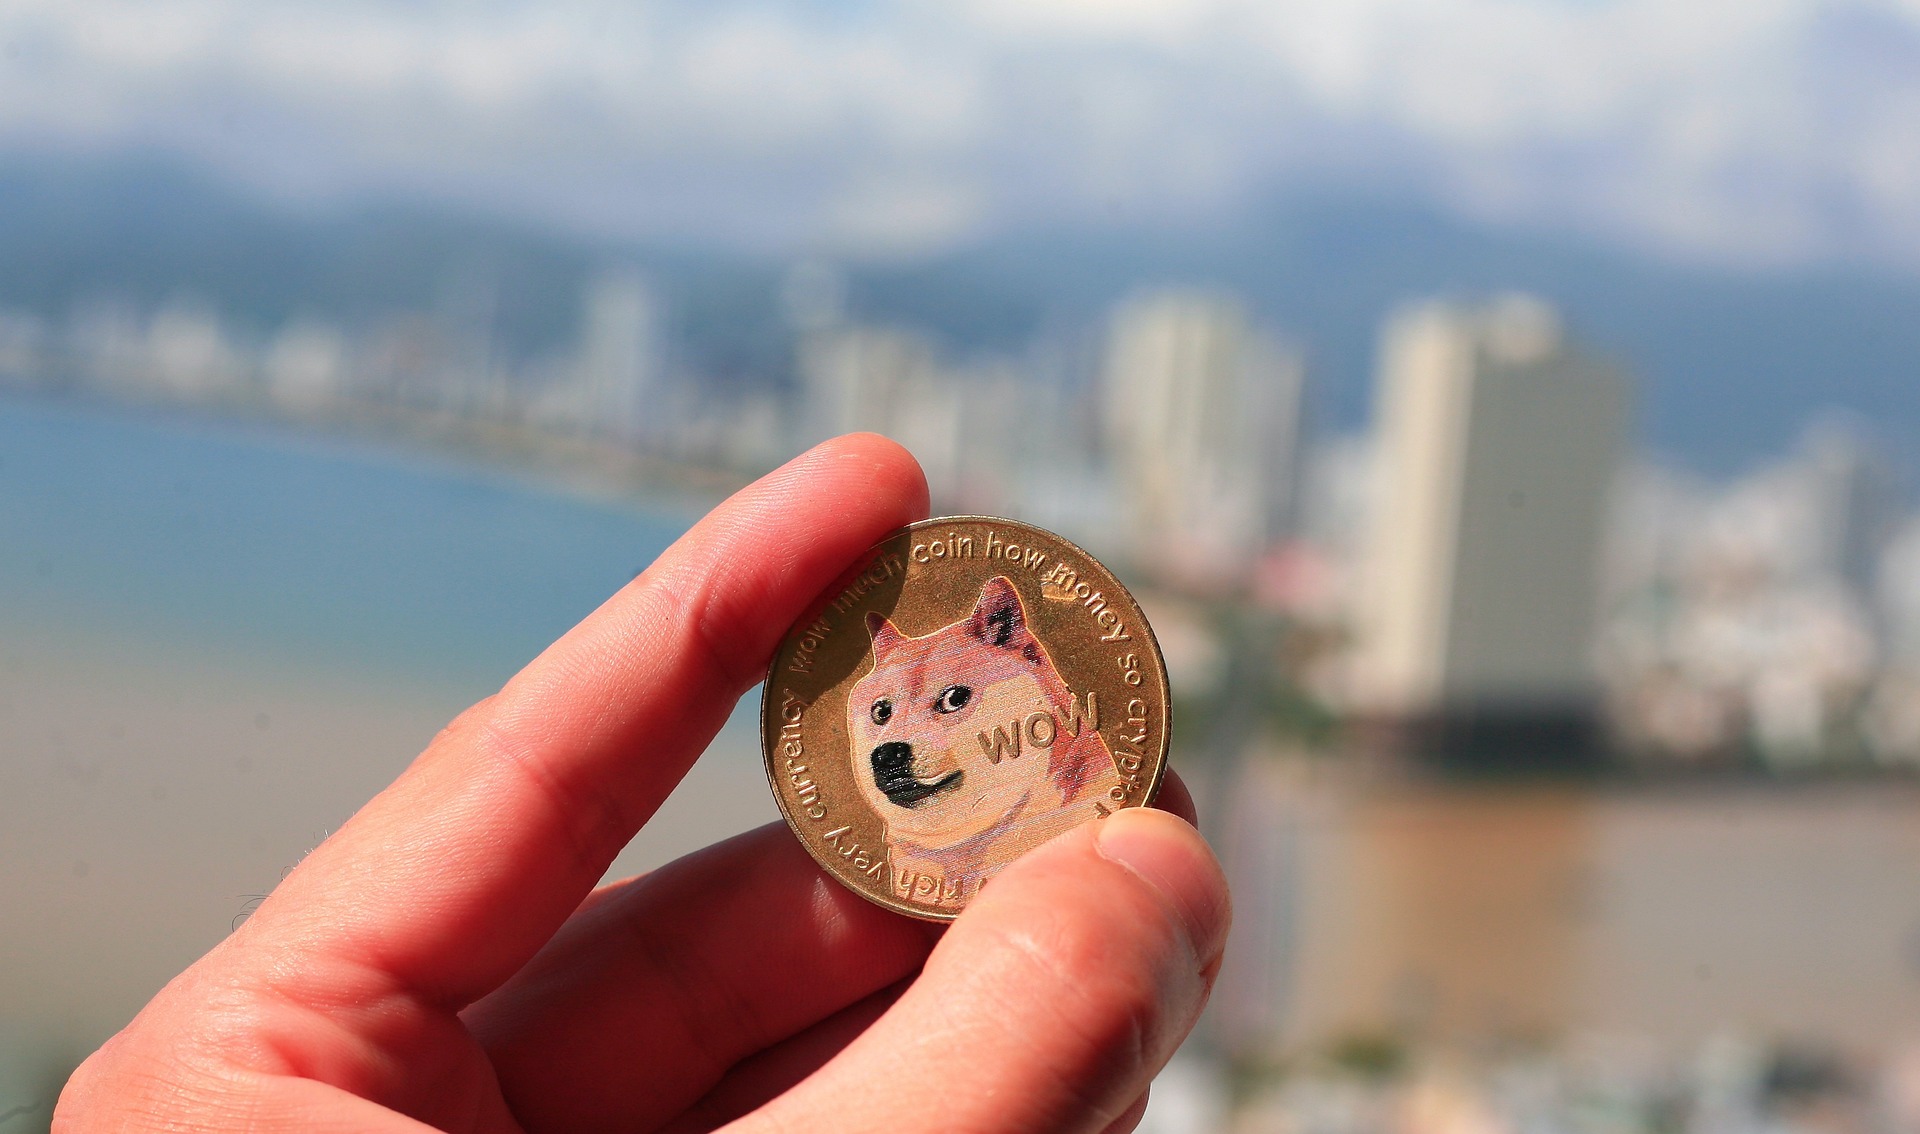 Geek insider, geekinsider, geekinsider. Com,, dogecoin: an overview of its case uses and adoption, crypto currency